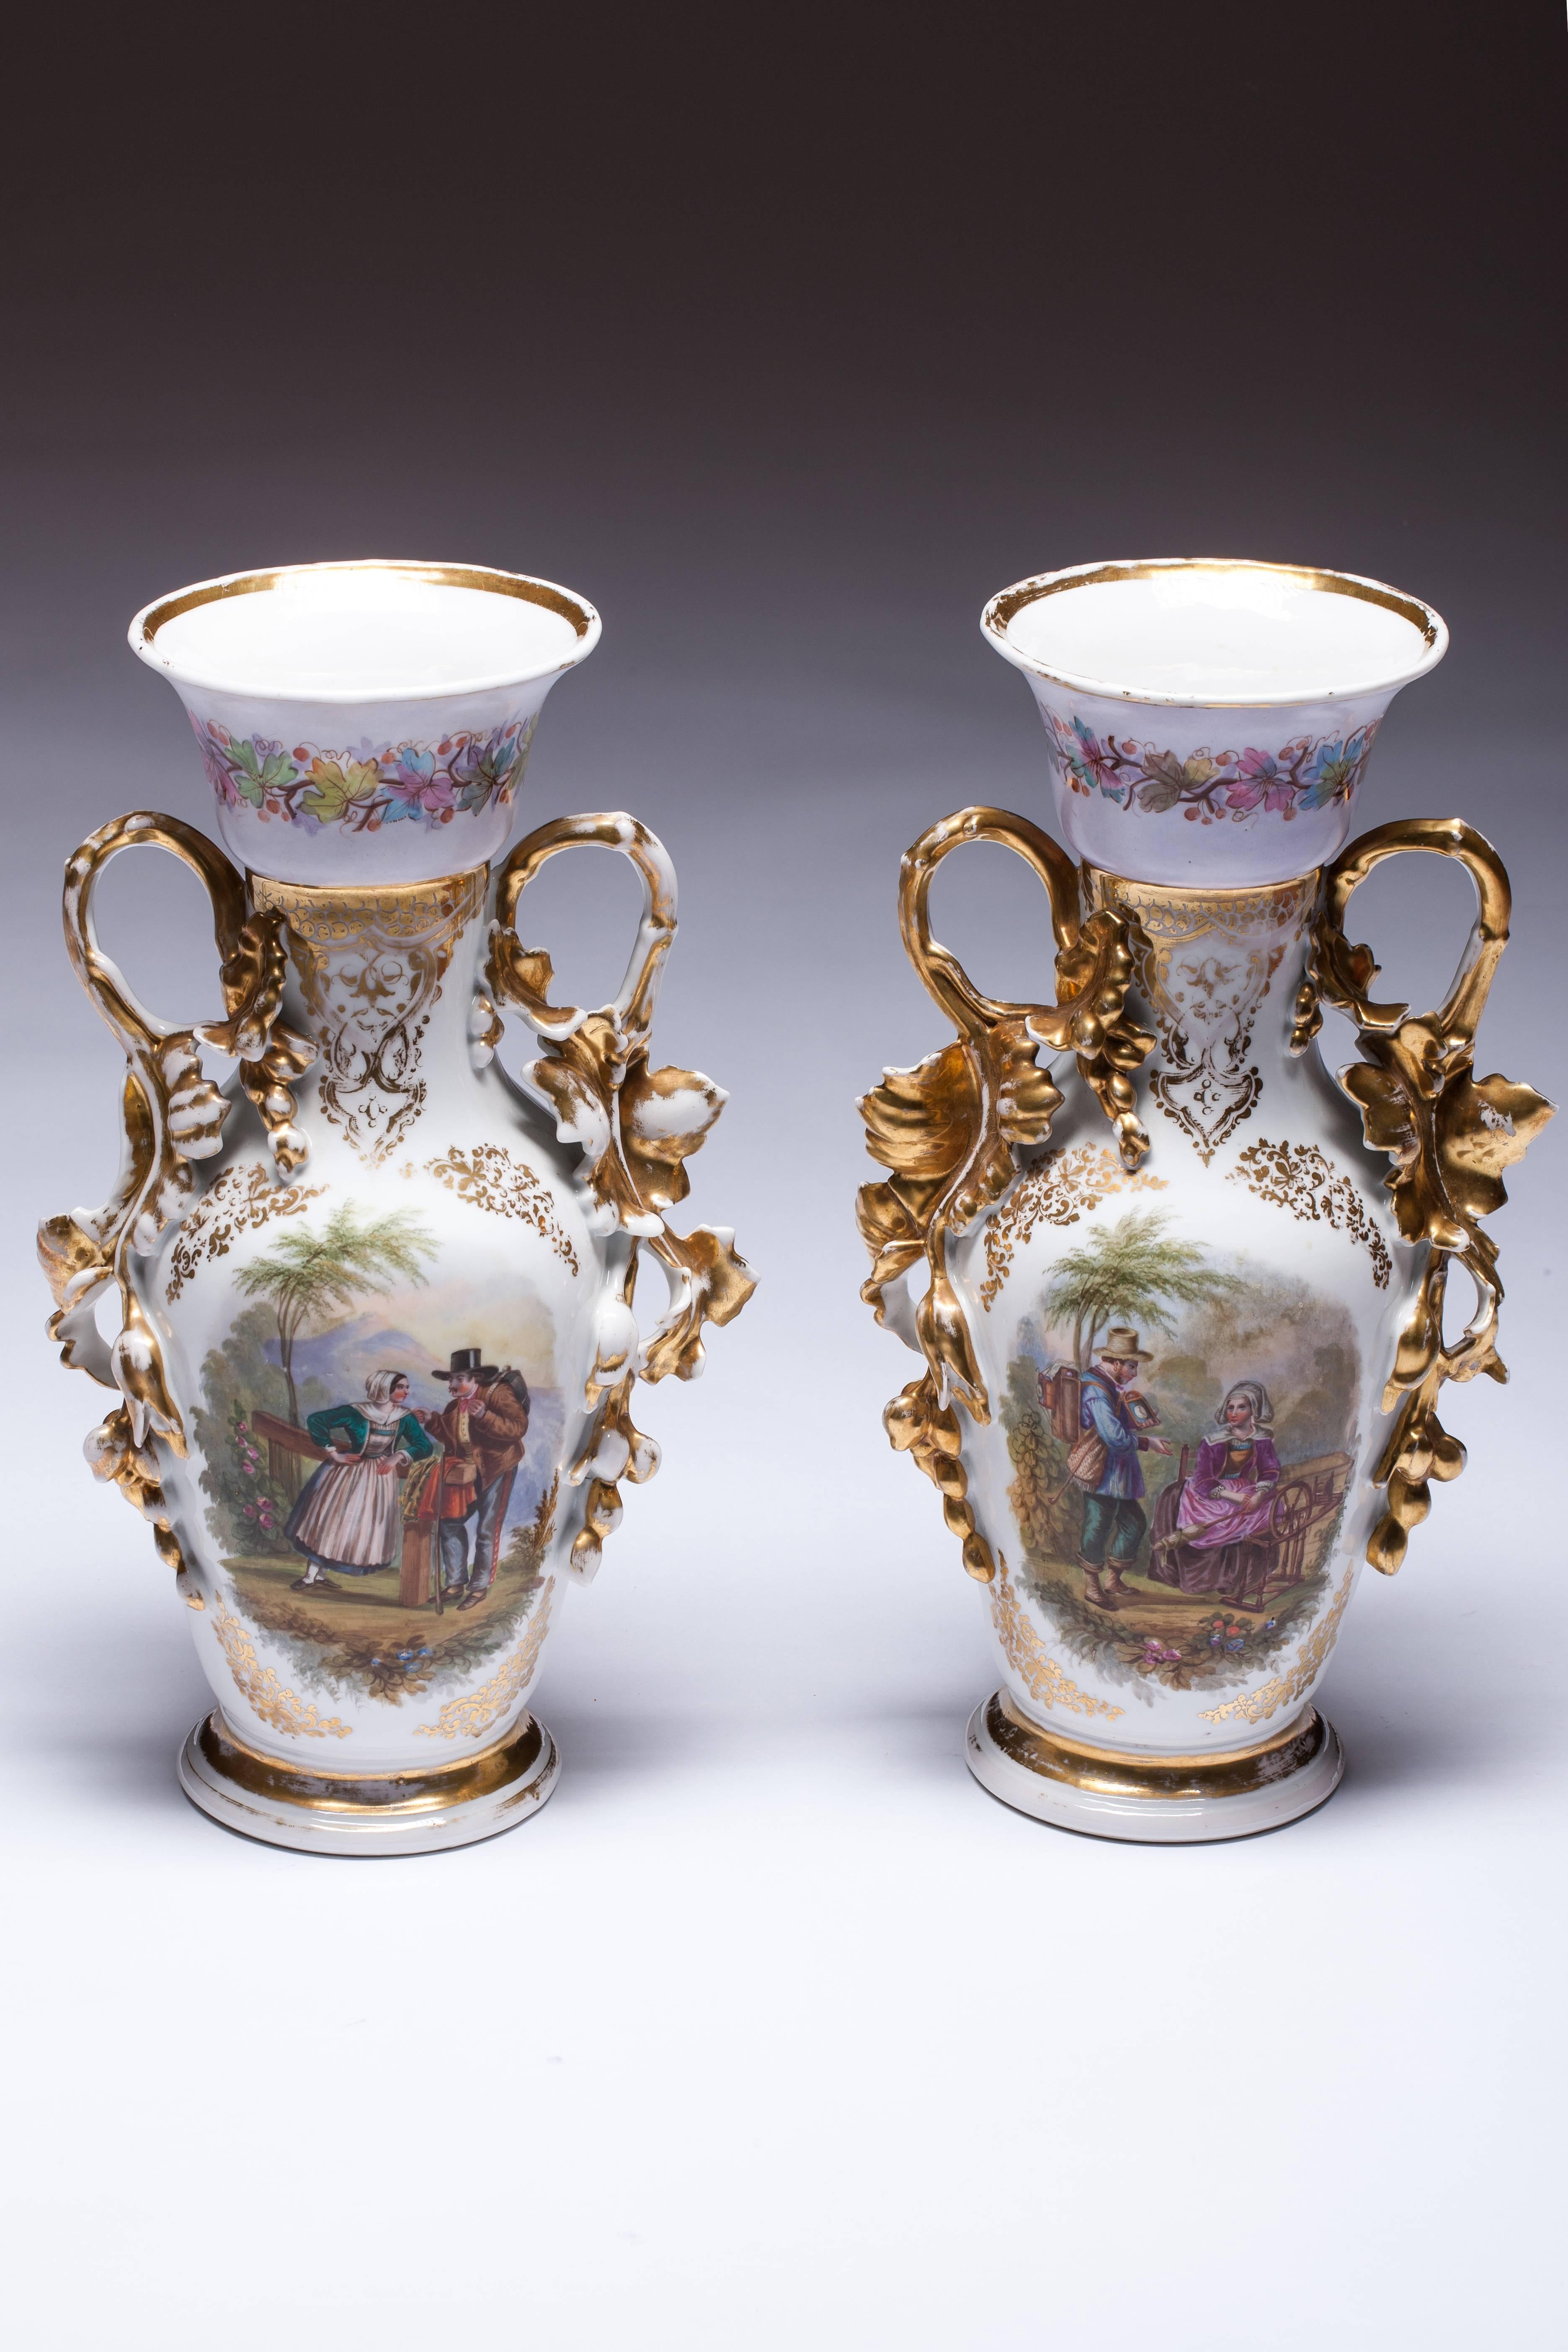 Pair of hand-painted Old Paris vases on an alternating blue and white ground color. The vases feature hand paintings of floral decorations and country Family theme finished off with gilded ornate handles extending from top to bottom. Excellent